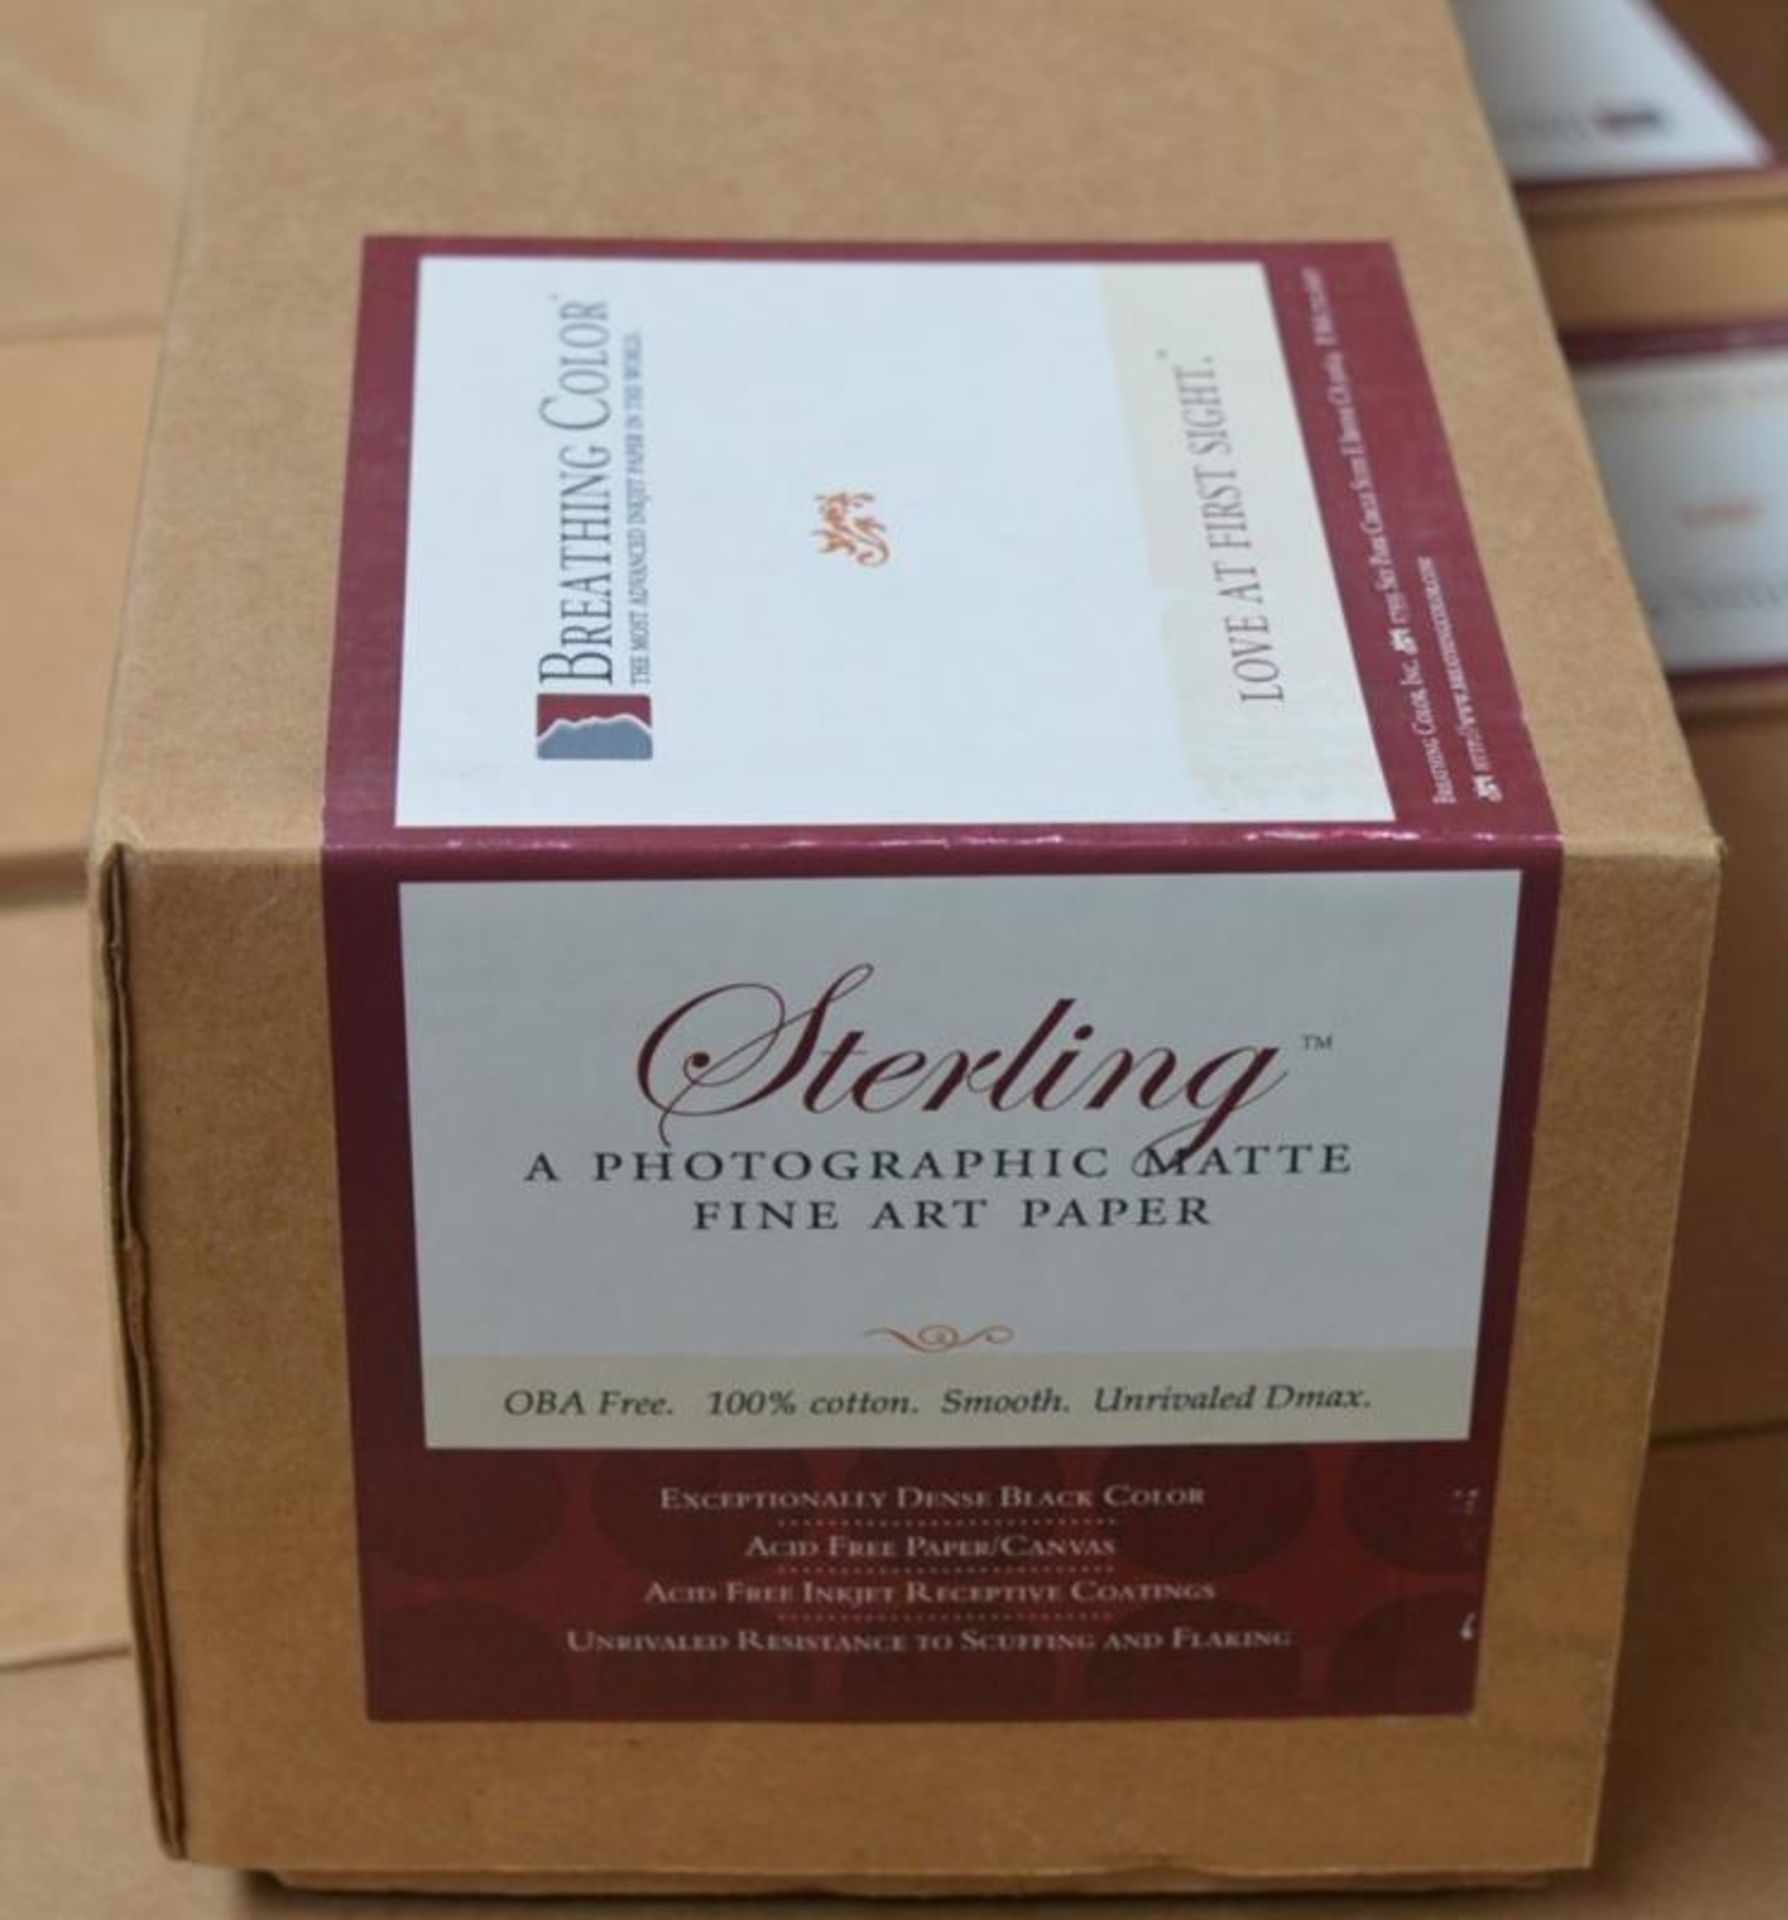 4 x Breathing Colour STERLING Photographic Matte Fine Art Paper - Size 24"" x 40' - OBA Free - 100% - Image 2 of 3